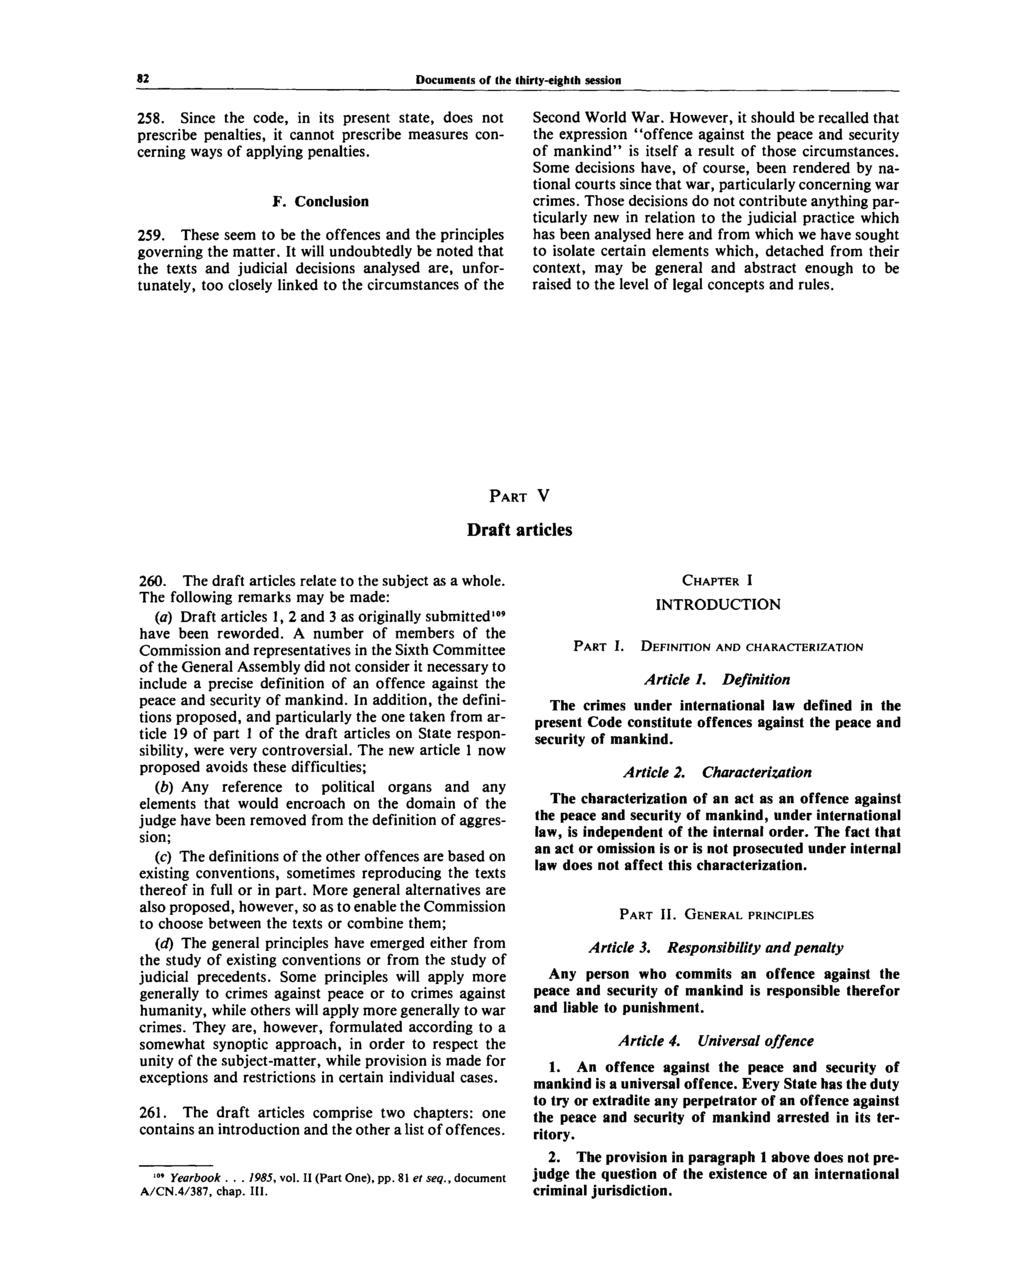 82 Documents of the thirty-eighth session 258. Since the code, in its present state, does not prescribe penalties, it cannot prescribe measures concerning ways of applying penalties. F.